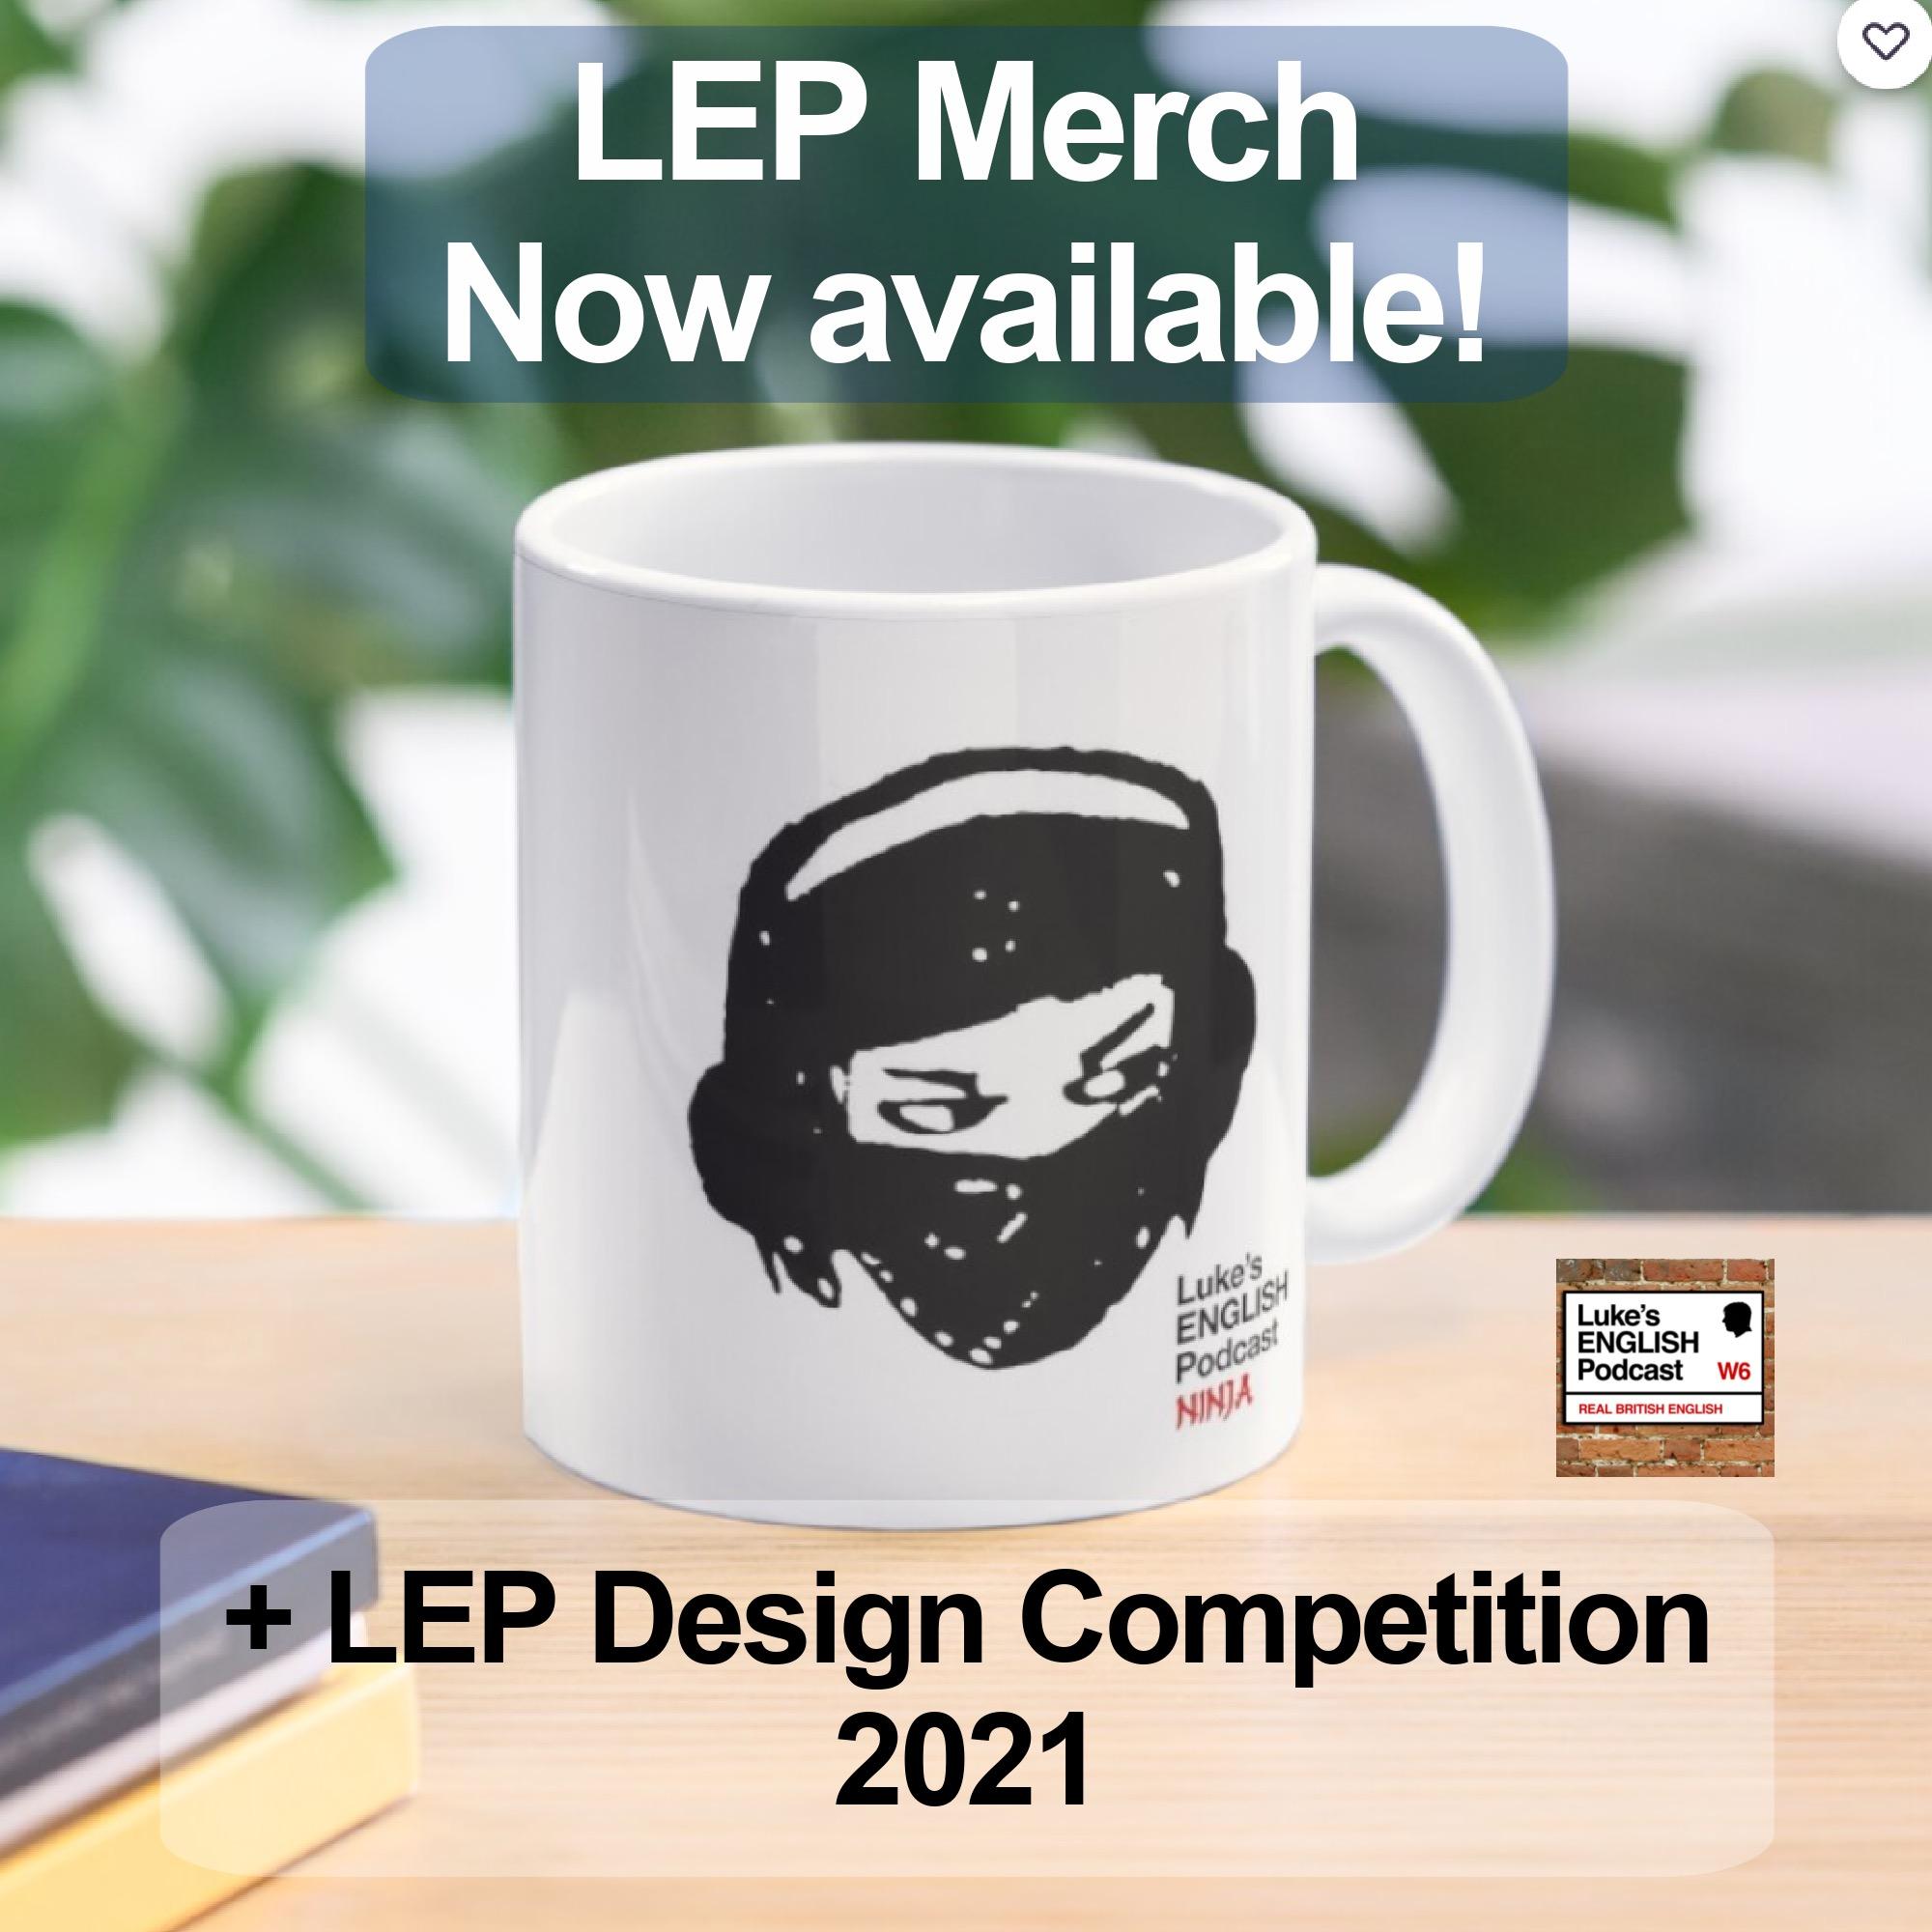 742. NEW LEP T-SHIRTS & MERCH + LEP DESIGN COMPETITION 2021 with James